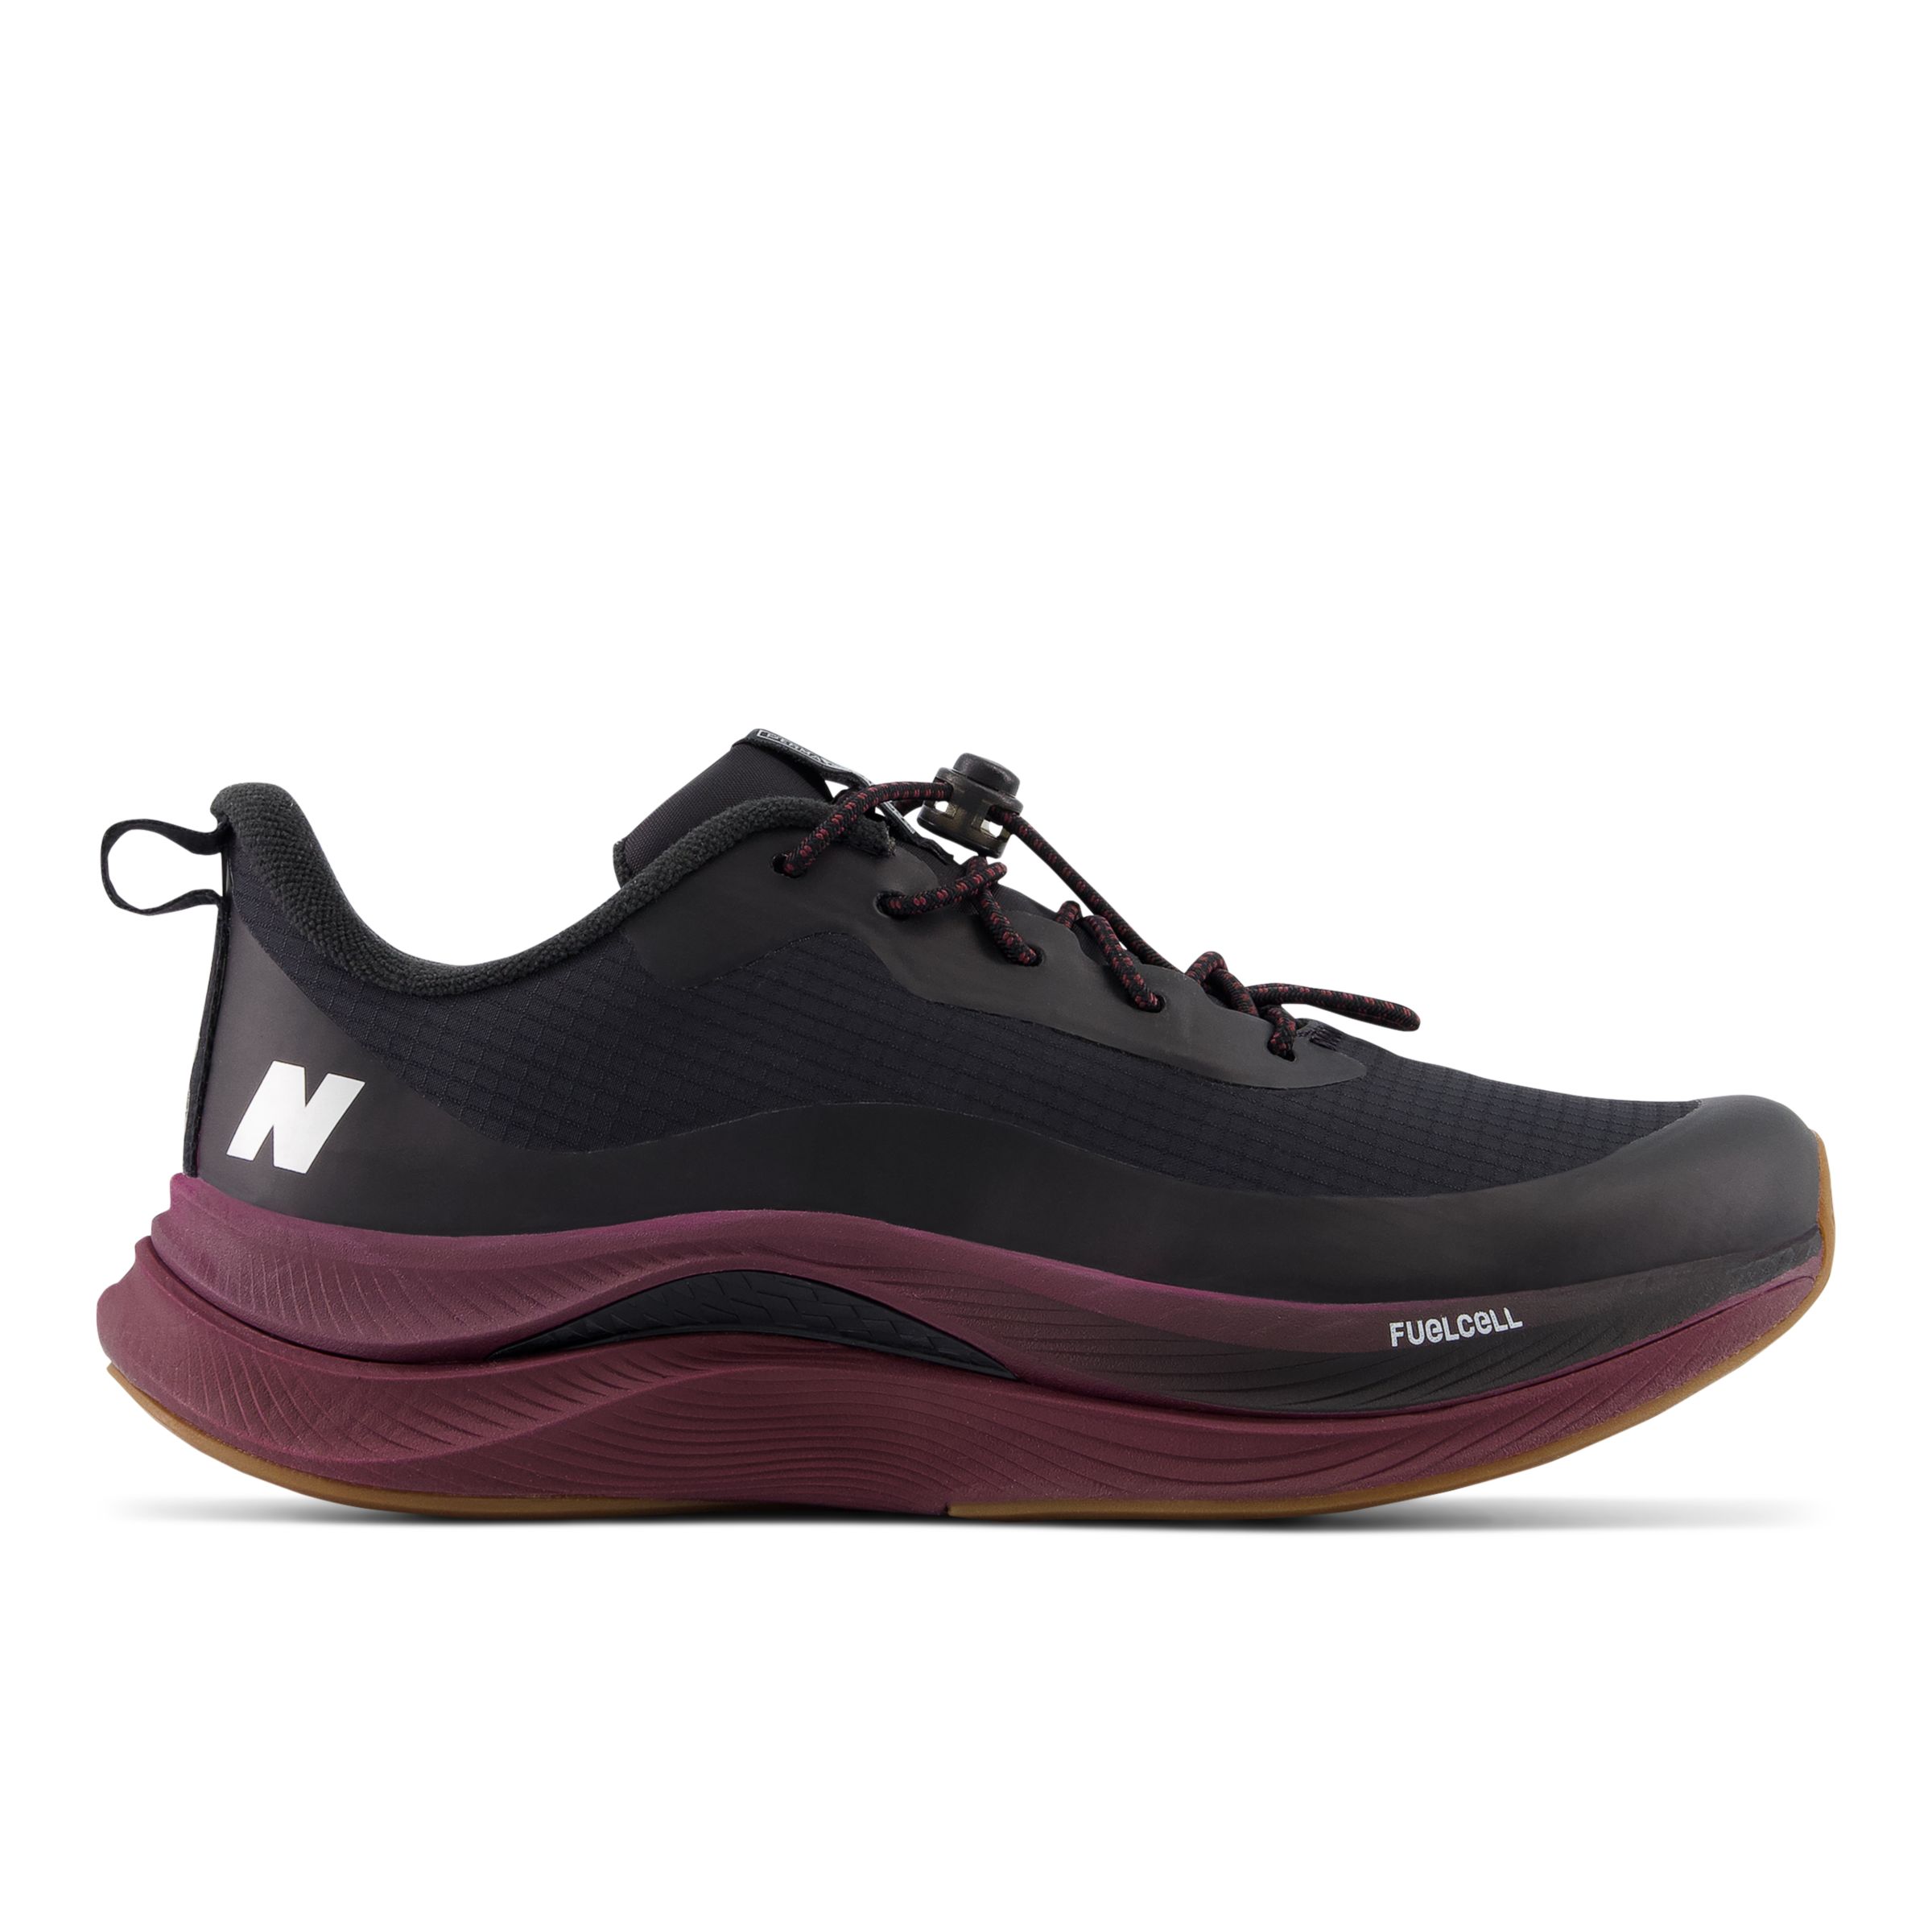 New Balance Femme FuelCell Propel v4 Permafrost en Noir/Mauve, Synthetic, Taille 40